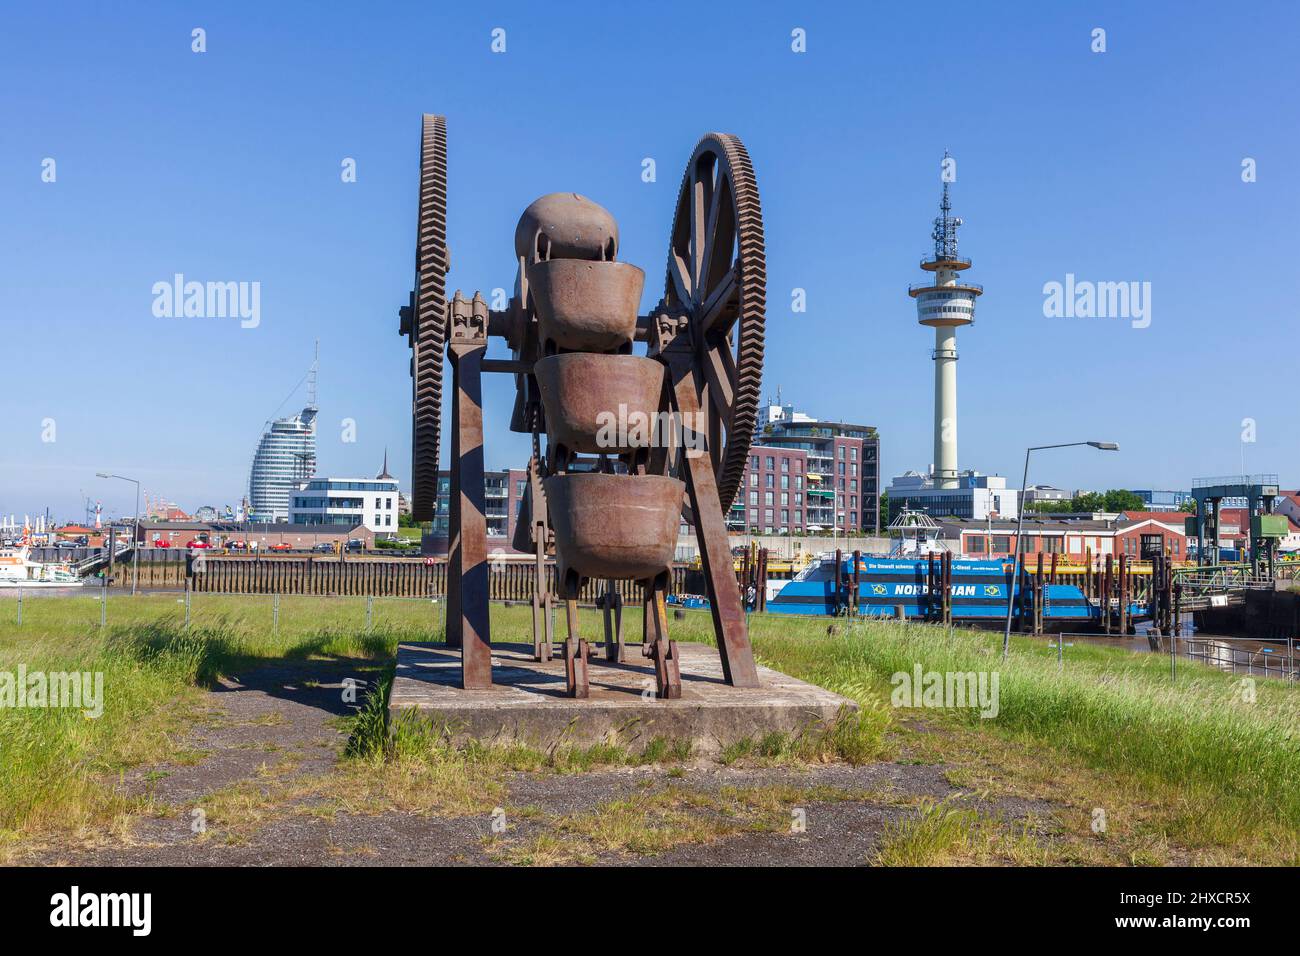 Monument bucket chain excavator, modern architecture, directional radio tower and car ferry to Nordenham on the Geeste, Bremerhaven, Bremen, Germany, Europe Stock Photo